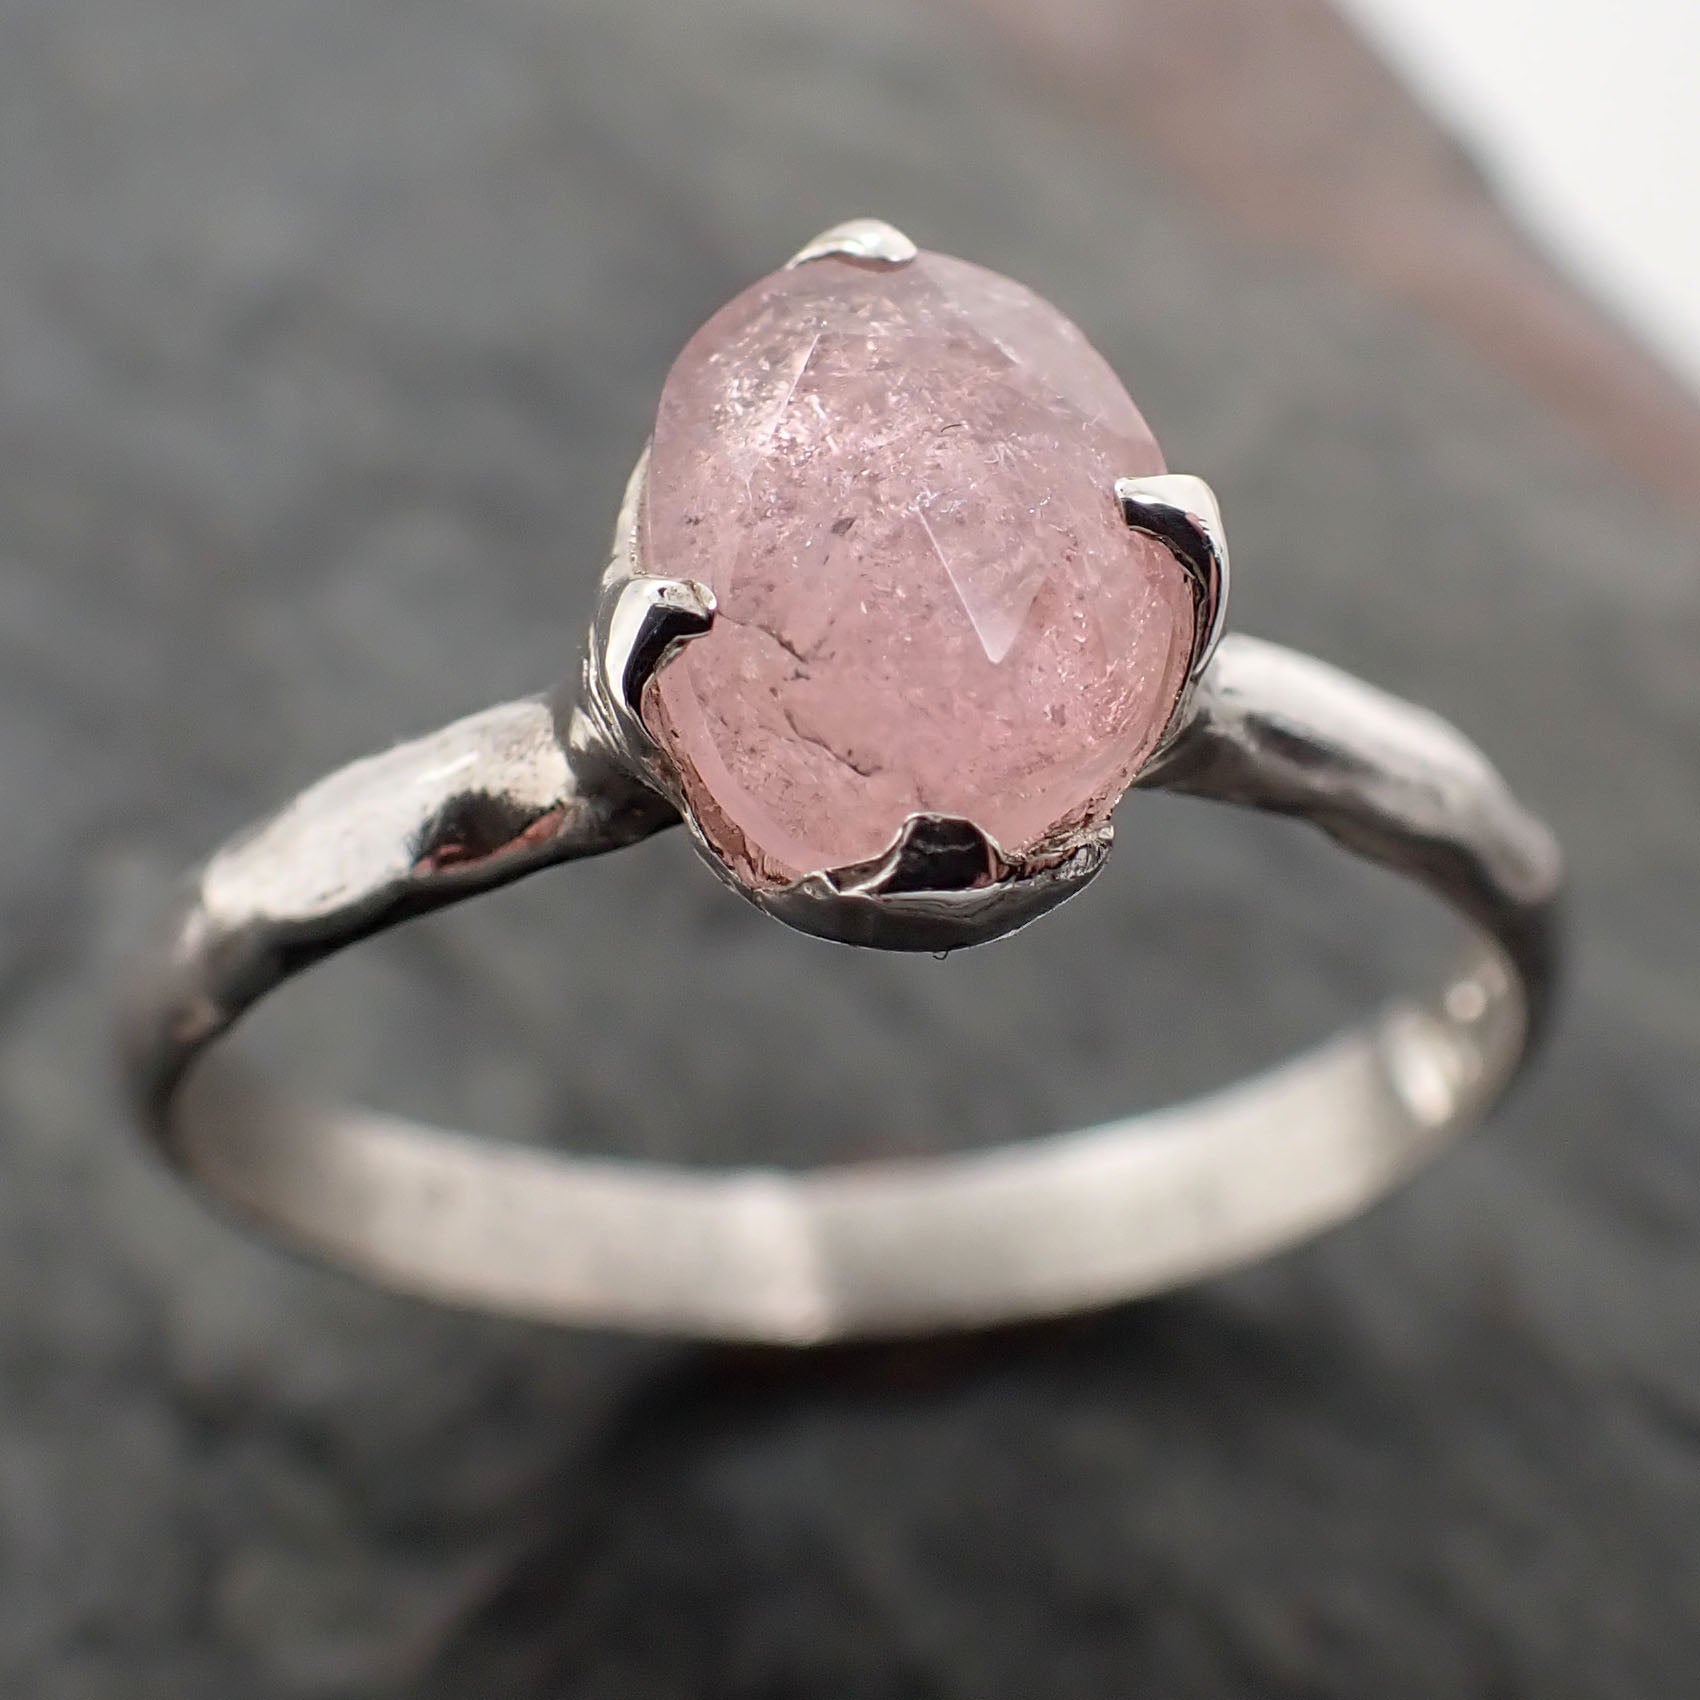 fancy cut pink tourmaline sterling silver ring gemstone solitaire recycled statement ss00087 Alternative Engagement